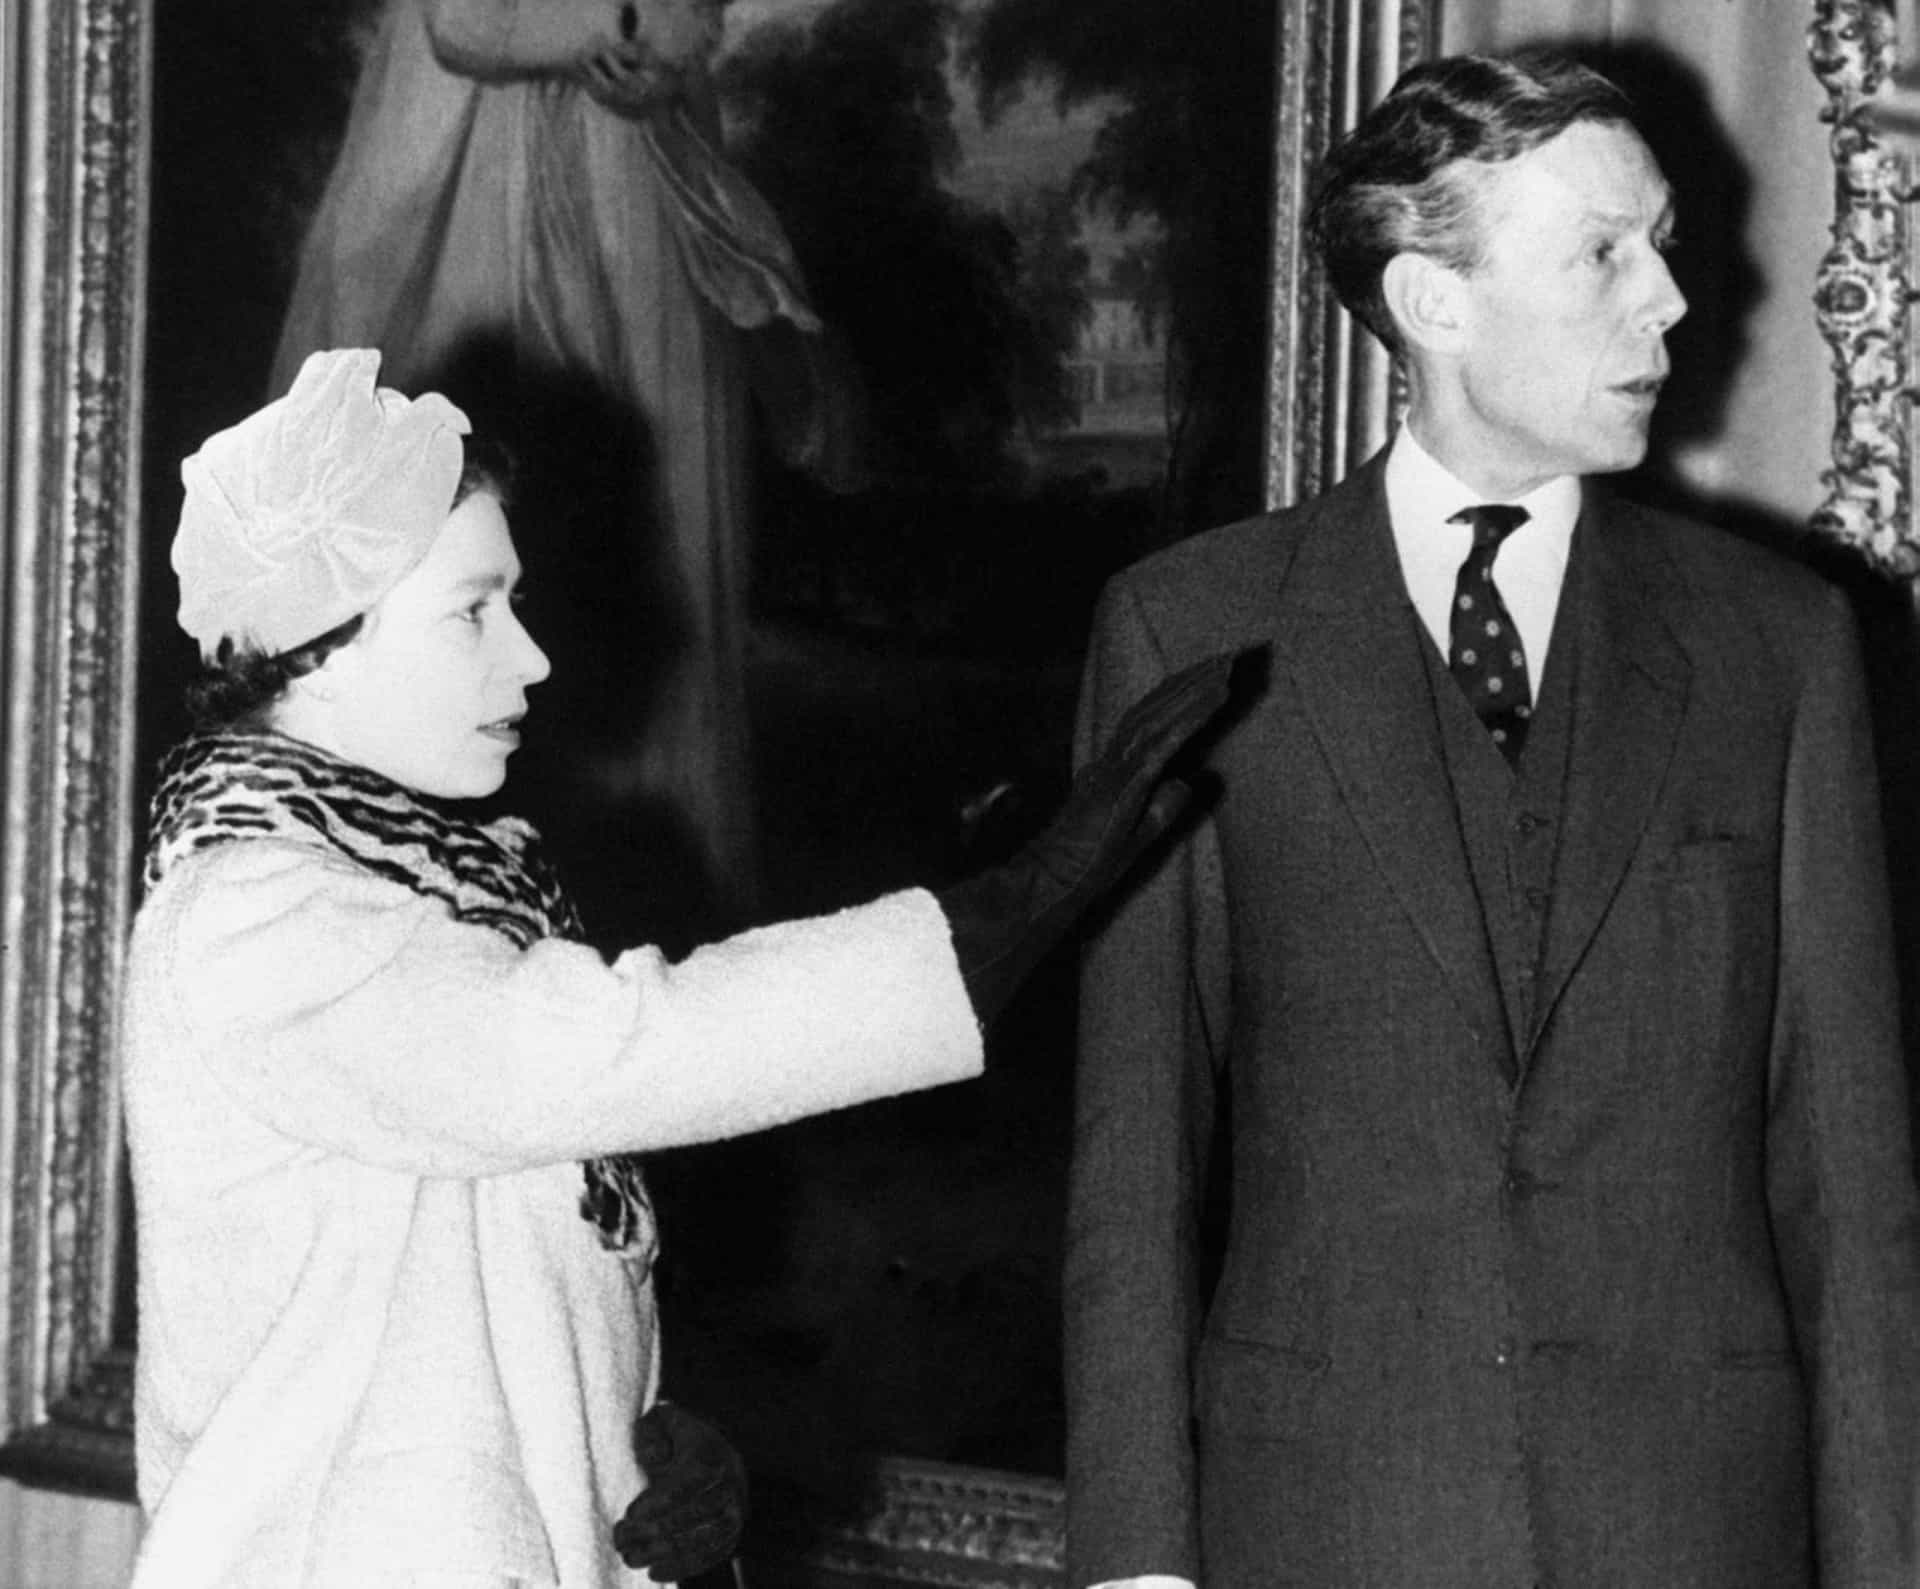 <p>After being offered immunity from prosecution in 1964, Anthony Blunt confessed to being a Soviet spy. This revelation was a closely guarded secret for years, during which time Blunt became Surveyor of the Queen's Pictures. He was unmasked in 1979, but was never prosecuted. He is pictured with the British monarch in the 1950s.</p>